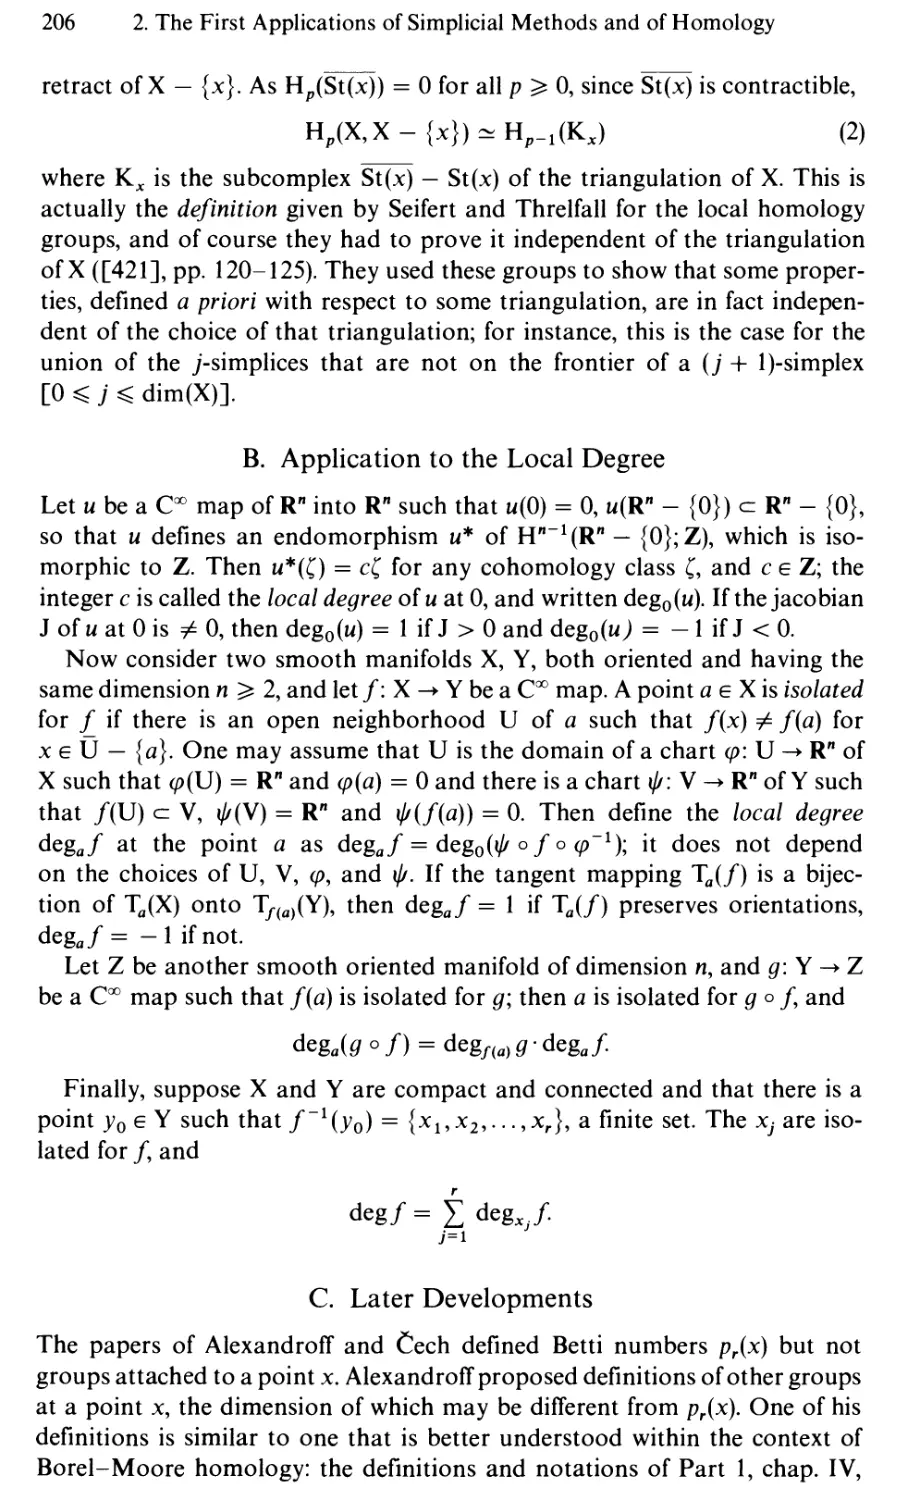 B. Application to the Local Degree
C. Later Developments